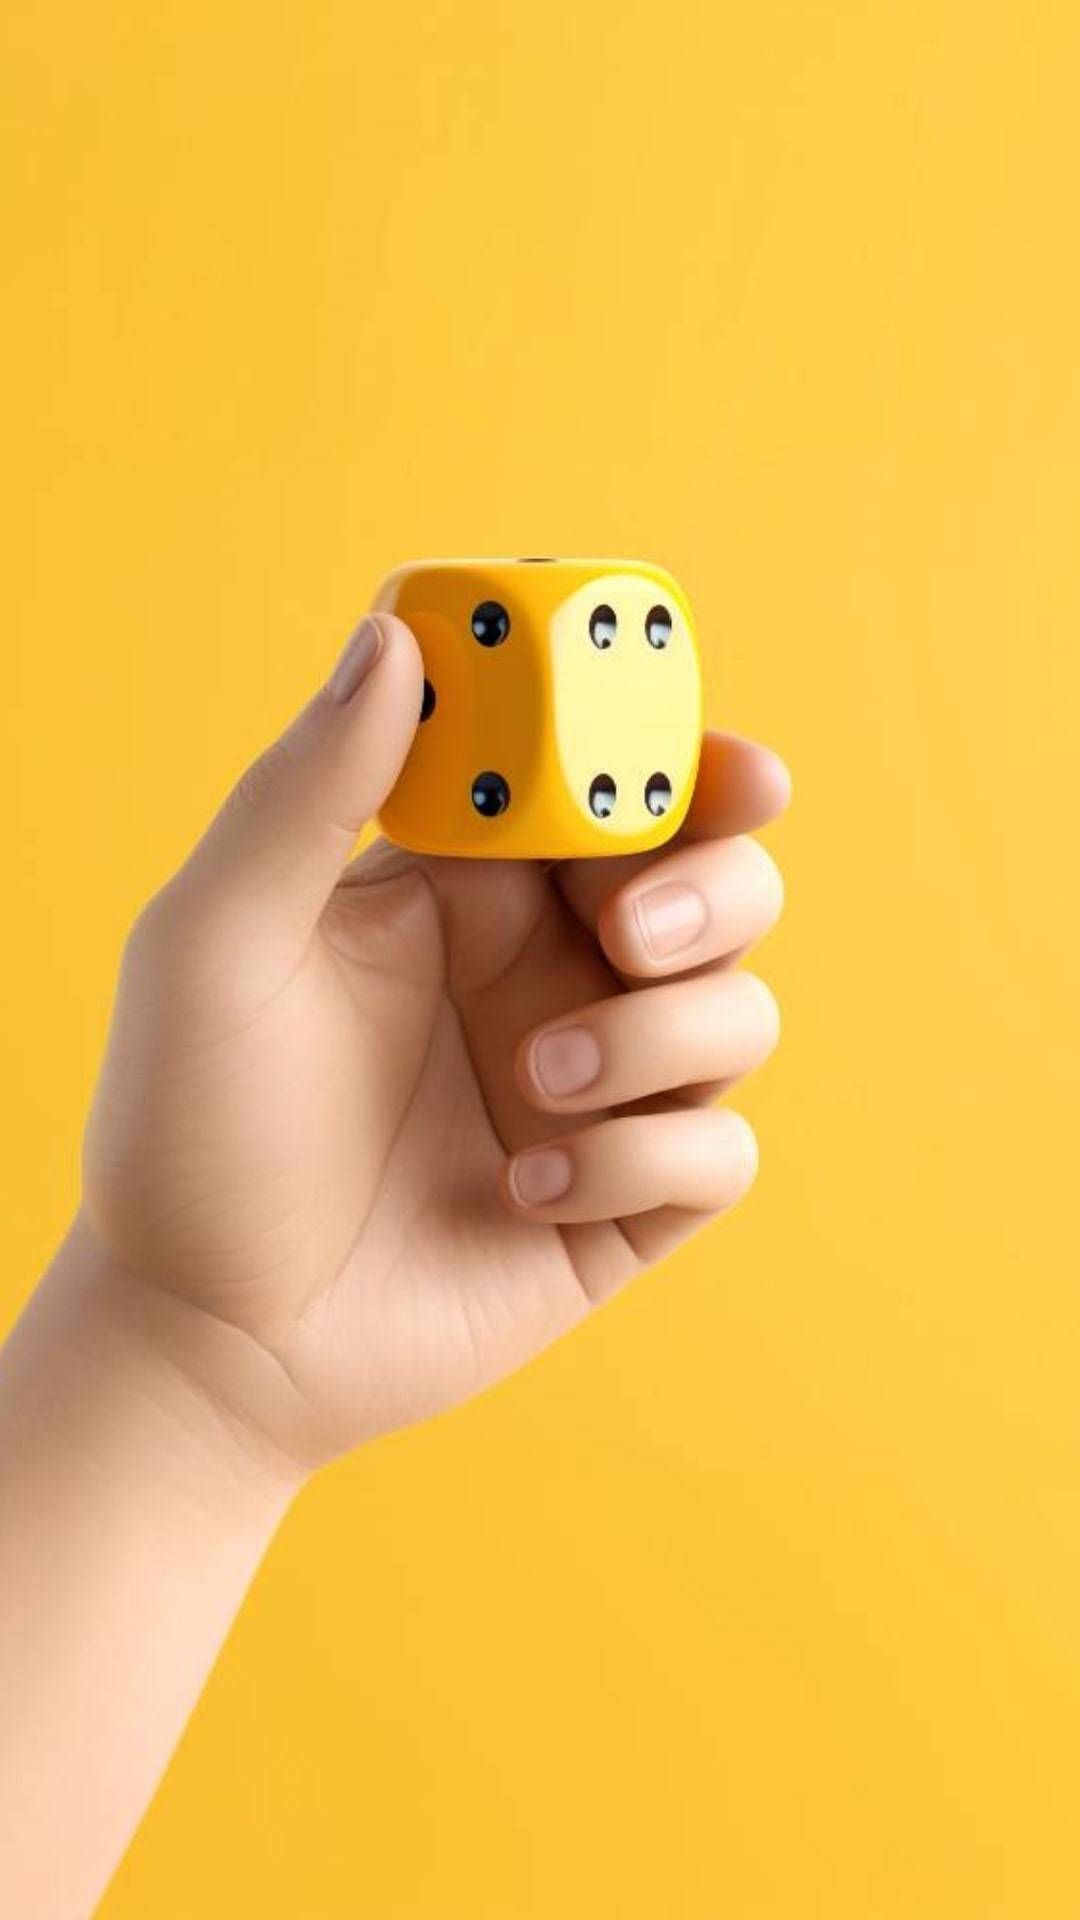 Six-sided yellow dice with numbers 1 through 6, showing the possibilities of chance.